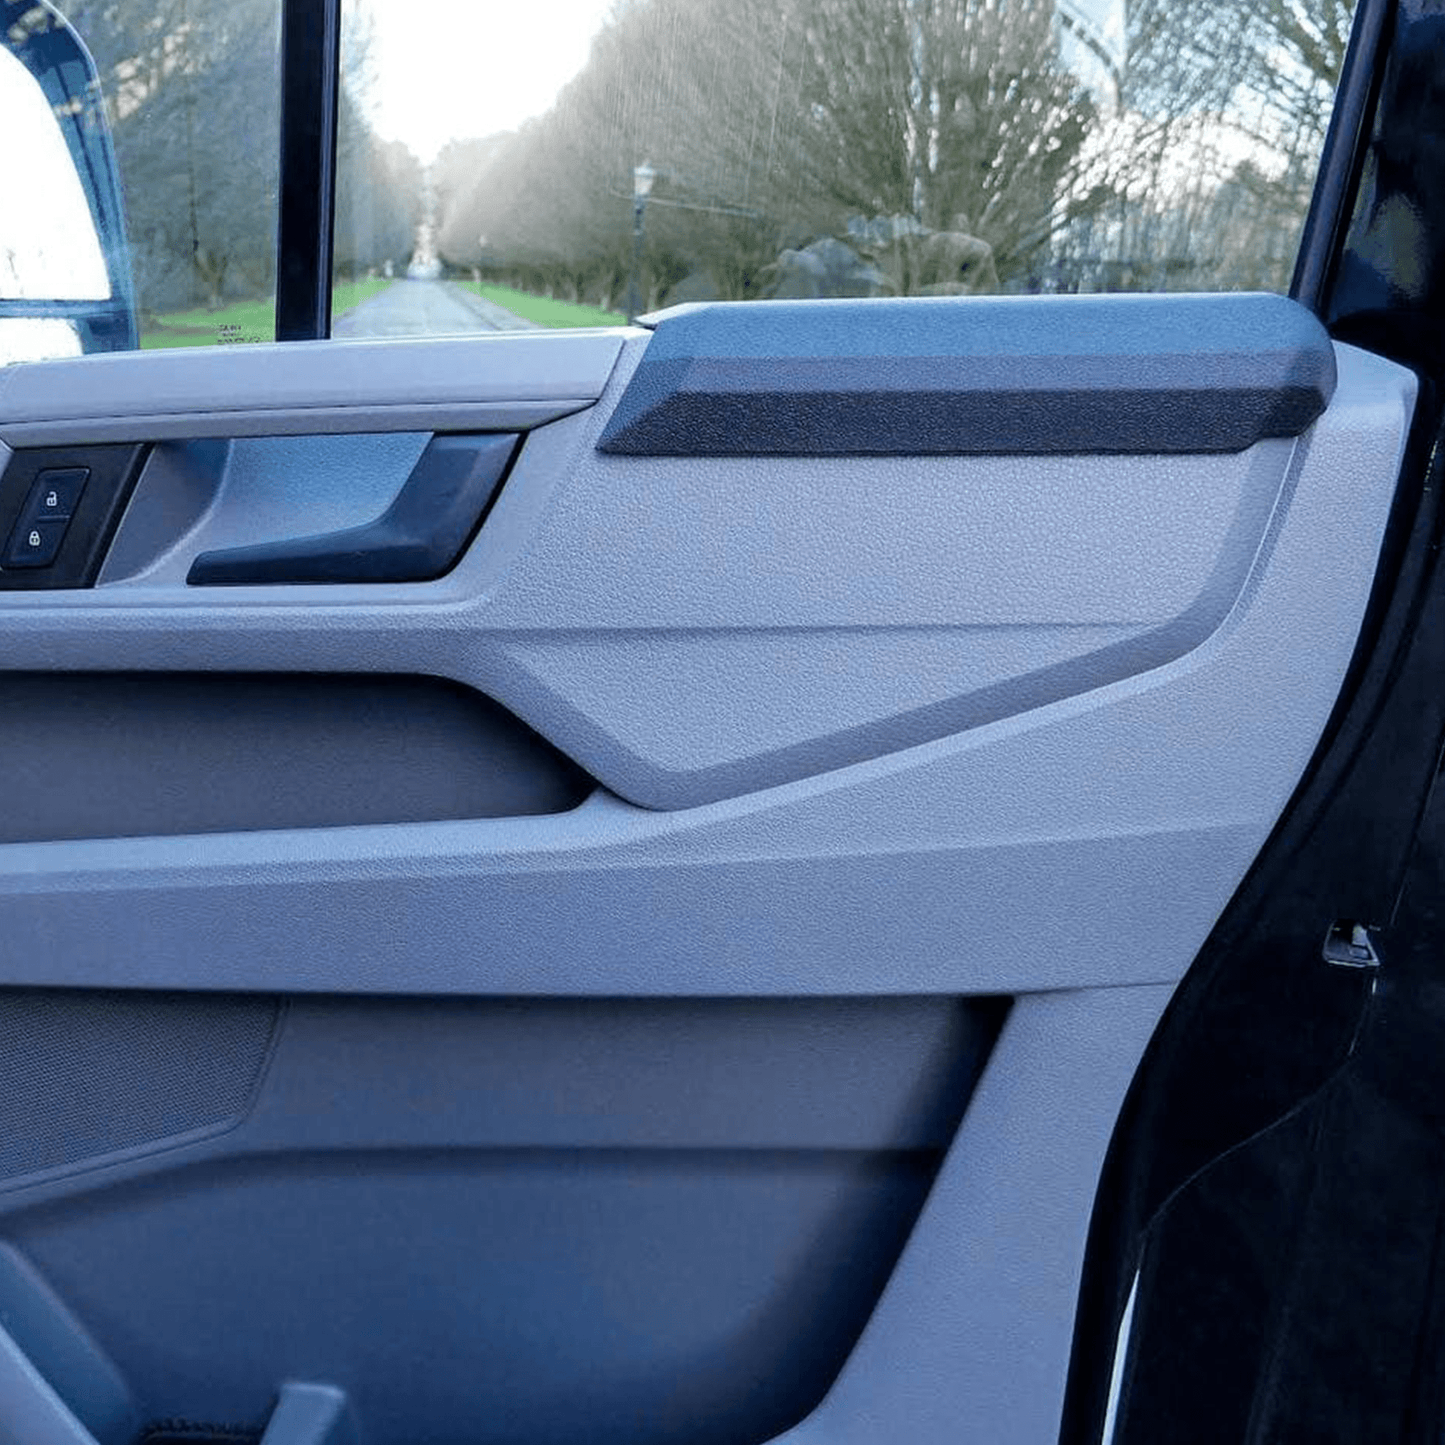 VW Crafter New Shape Transporter Door Card Arm Rest PU Foam campervan ideal gift, latest product